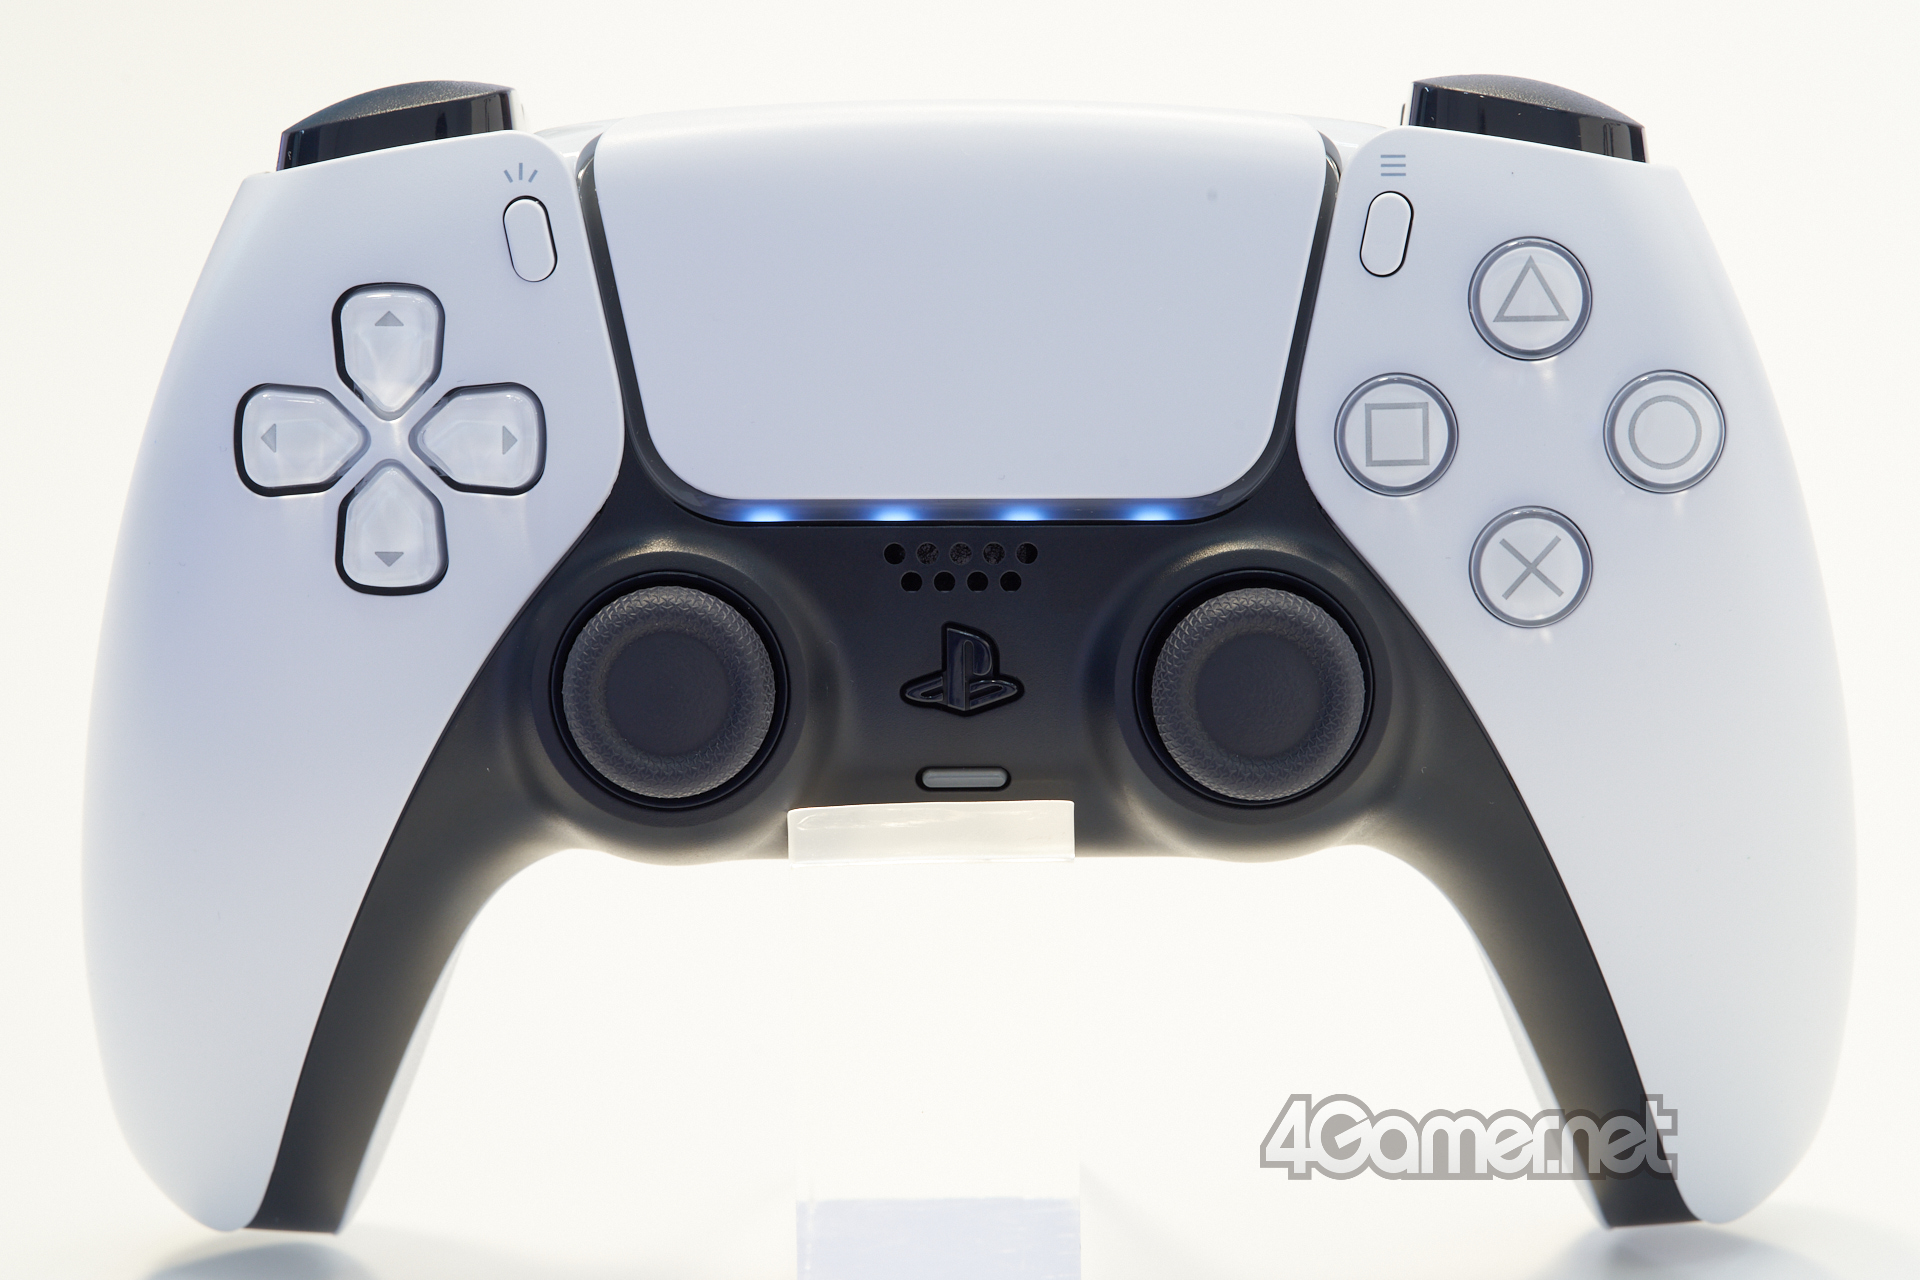 With its new models, Sony has quietly updated the PS5 DualSense controller